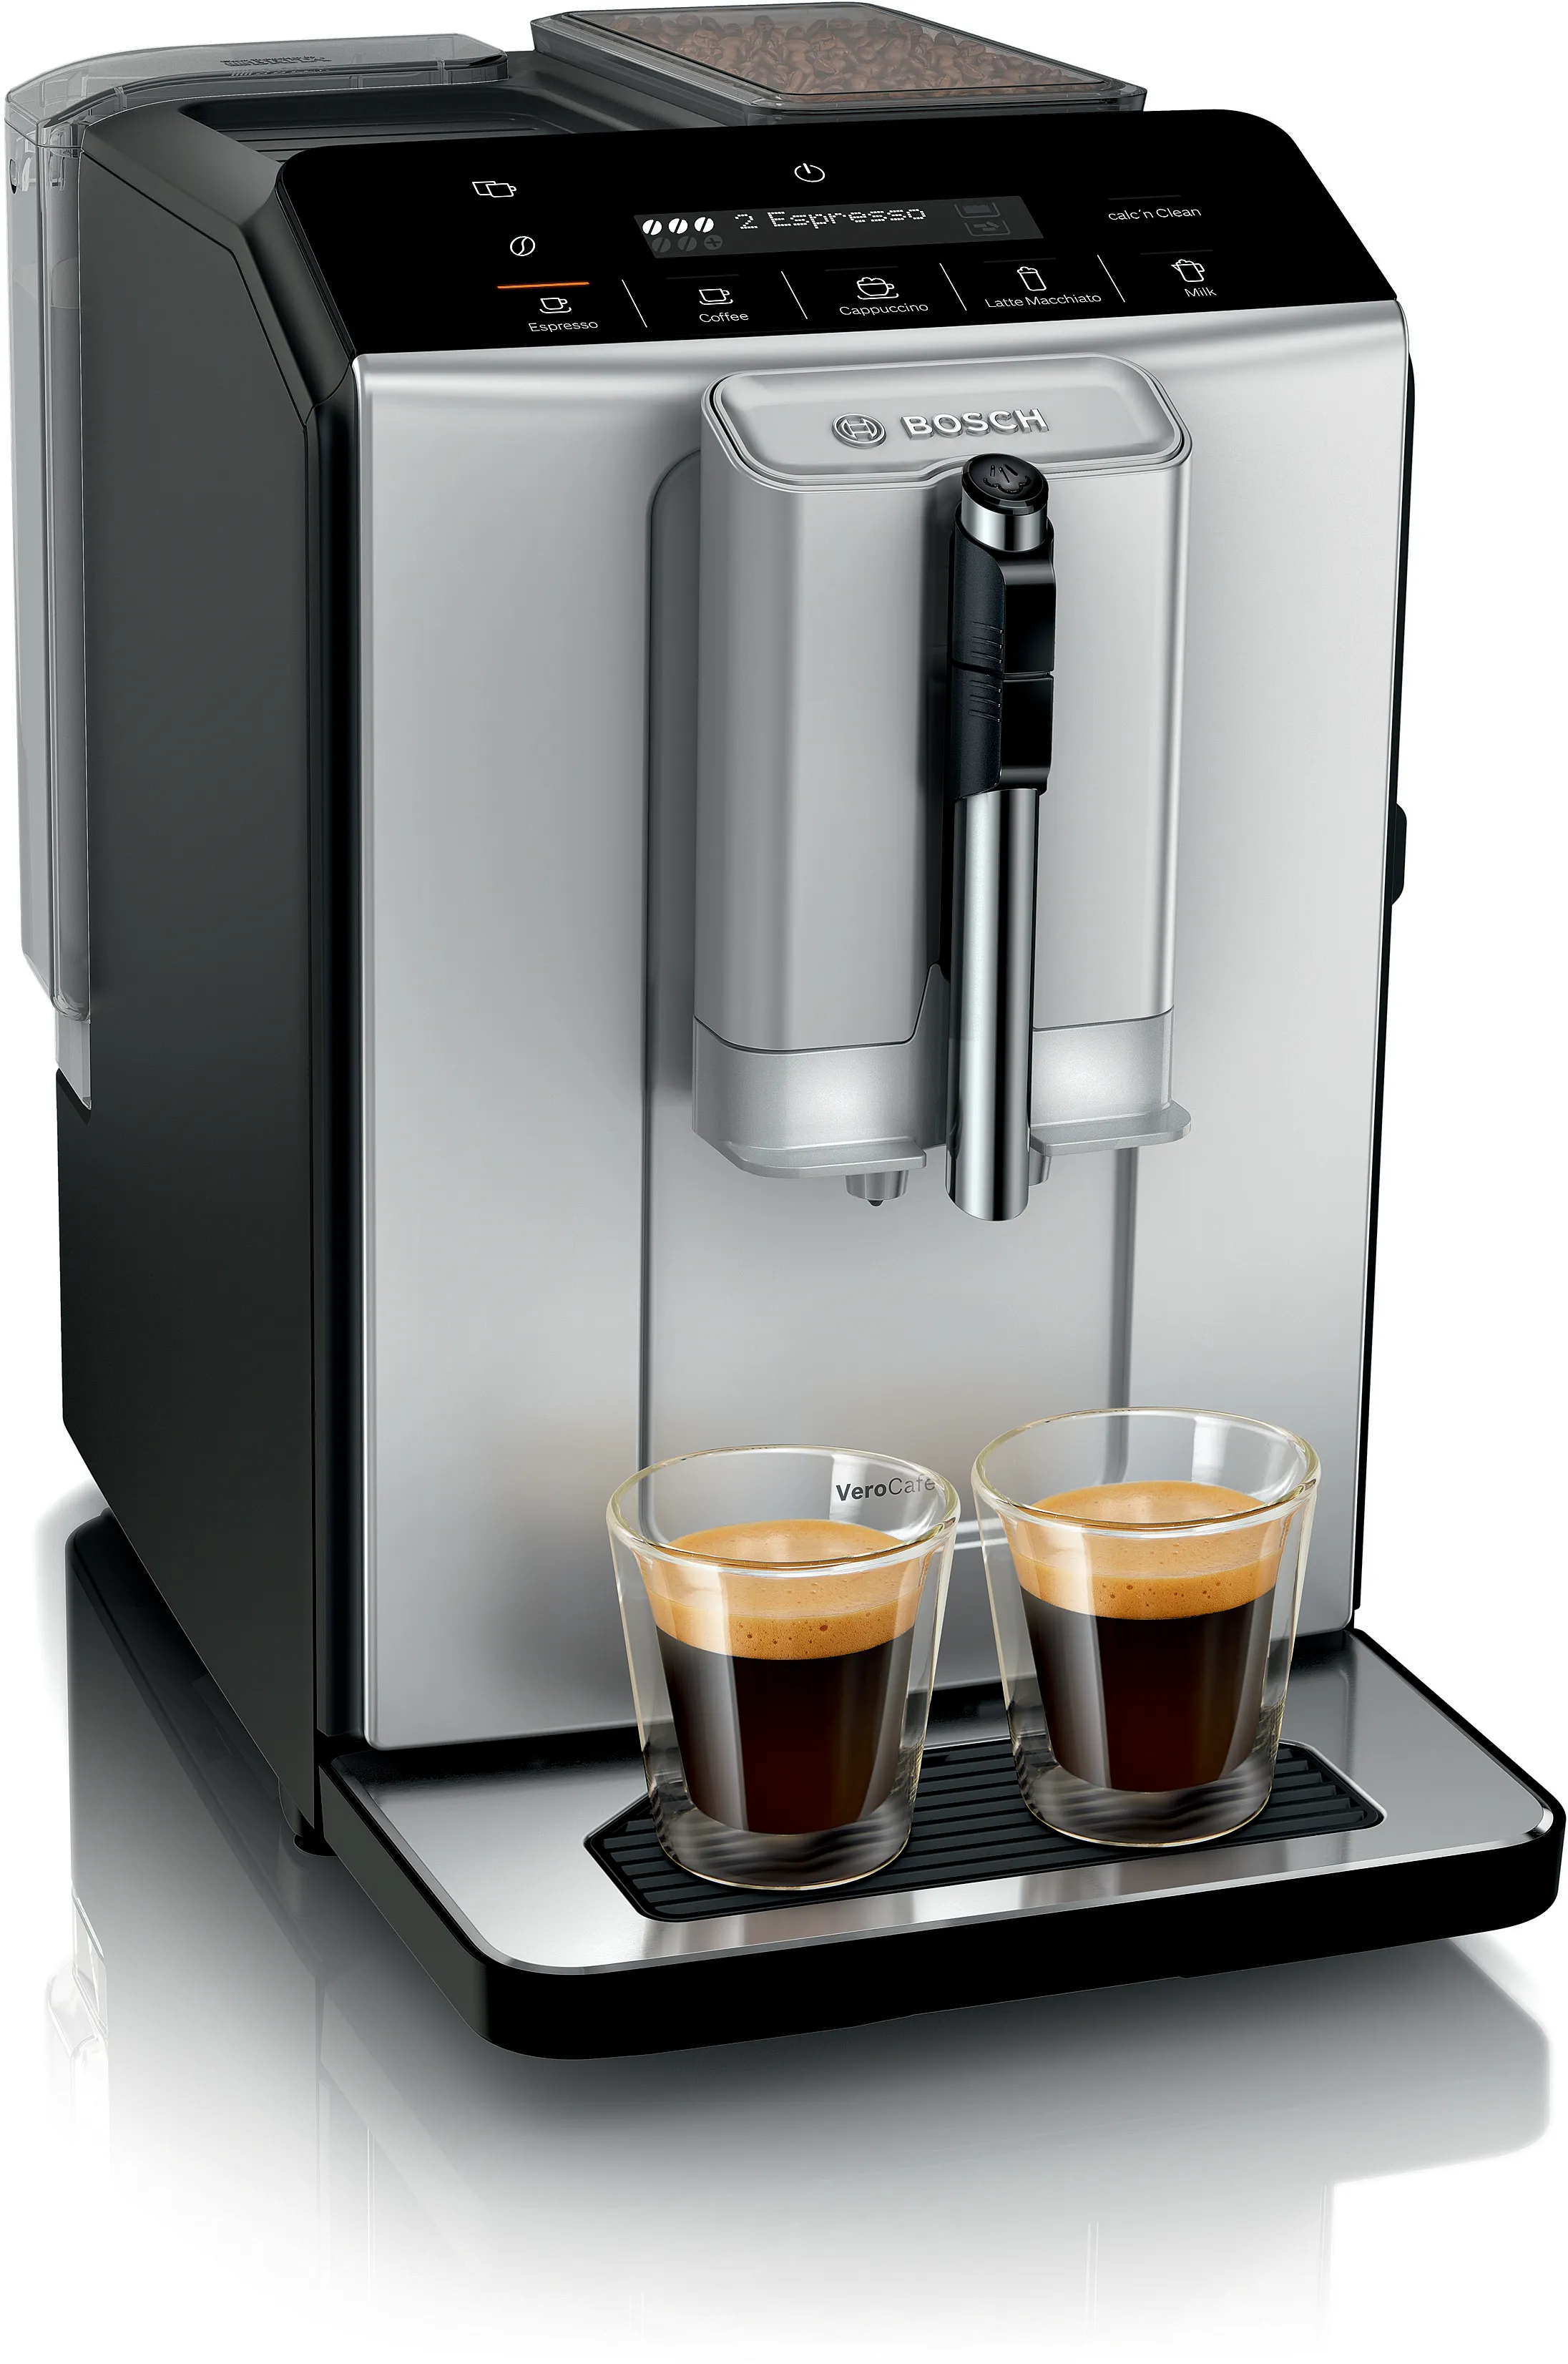 Series 2 Fully automatic coffee machine VeroCafe Silk Silver 